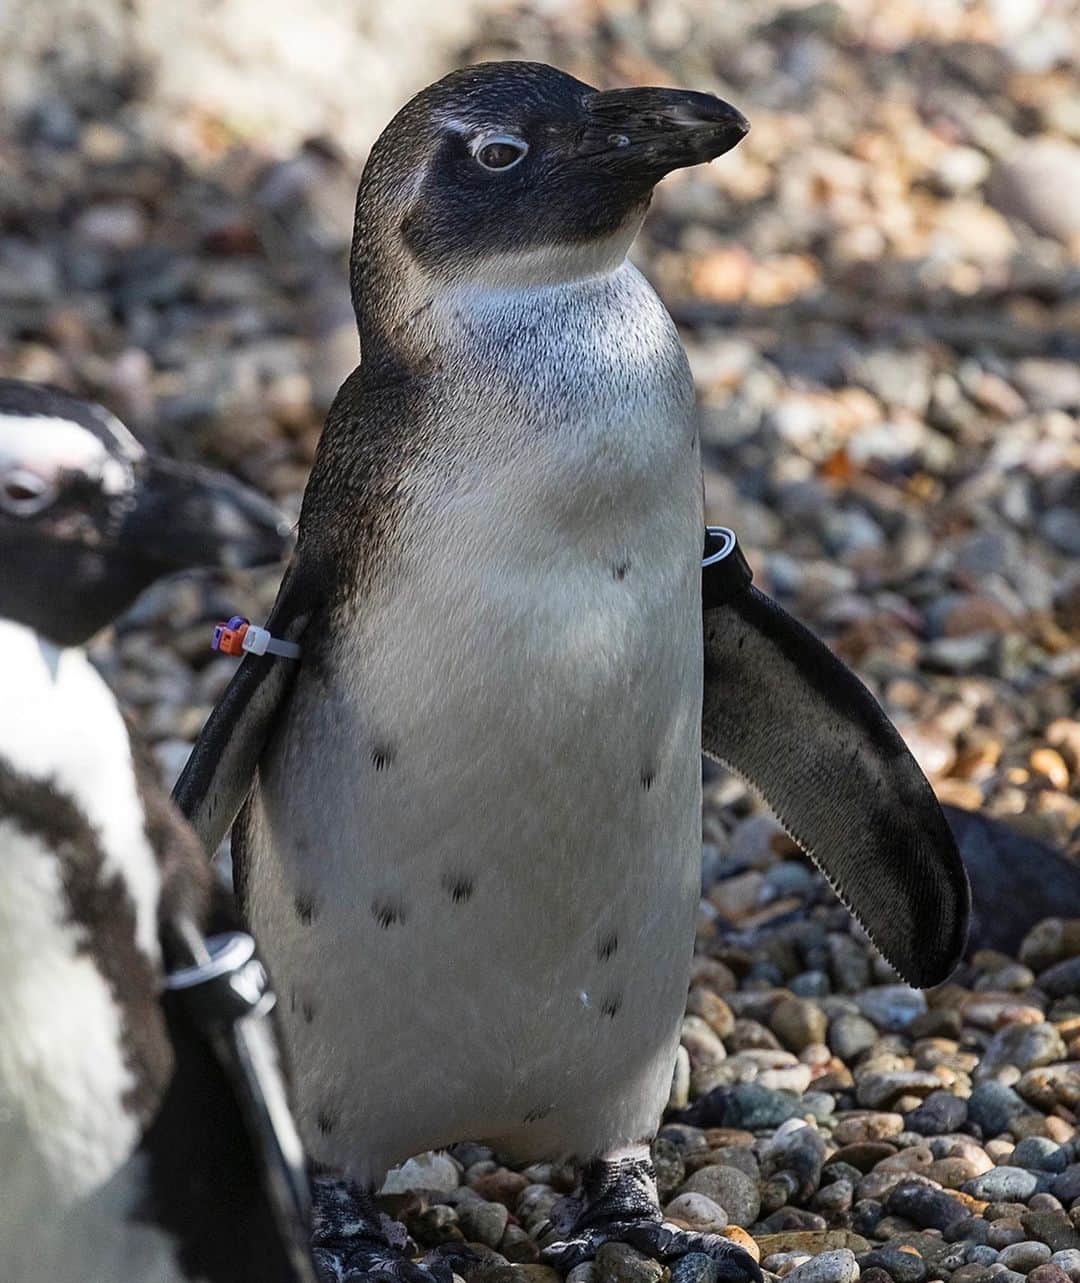 San Diego Zooさんのインスタグラム写真 - (San Diego ZooInstagram)「November's Penguin Progress Report is waddling into your holiday feed, and it’s a juicy one. ⠀⠀⠀⠀⠀⠀⠀⠀⠀ ⠀⠀⠀⠀⠀⠀⠀⠀⠀ 🐧 Doug is 𝗢𝗨𝗧𝗦𝗧𝗔𝗡𝗗𝗜𝗡𝗚. During his "teenager" phase, he was argumentative and pretty nasty, picking fights with other birds just minding their own business. Thankfully, Doug seems to be over his teen angst and is now becoming more friendly with keepers and his feathered friends. ⠀⠀⠀⠀⠀⠀⠀⠀⠀ ⠀⠀⠀⠀⠀⠀⠀⠀⠀ 🐧 Courtney  𝗡𝗘𝗘𝗗𝗦 𝗜𝗠𝗣𝗥𝗢𝗩𝗘𝗠𝗘𝗡𝗧. She was sneaking around behind McKinny's back and left him for Mac, who had a beautiful nest box. A few days later, the males fought over Courtney and the nest box. Mac lost and was forced to look for a new home while Courtney moved into his box with McKinney. But it doesn't end there. While McKinney is in their stolen nest box, Courtney has been seen on the beach flirting and swimming with Mac. She's a two-timer and it's not fair to either of the boys. ⠀⠀⠀⠀⠀⠀⠀⠀⠀ ⠀⠀⠀⠀⠀⠀⠀⠀⠀ Double-tap if you're thankful for #PenguinBeach this holiday season. 🐧 #PenguinProgressReport #sandiegozoo #moredramathantherealhousewives」11月28日 2時13分 - sandiegozoo